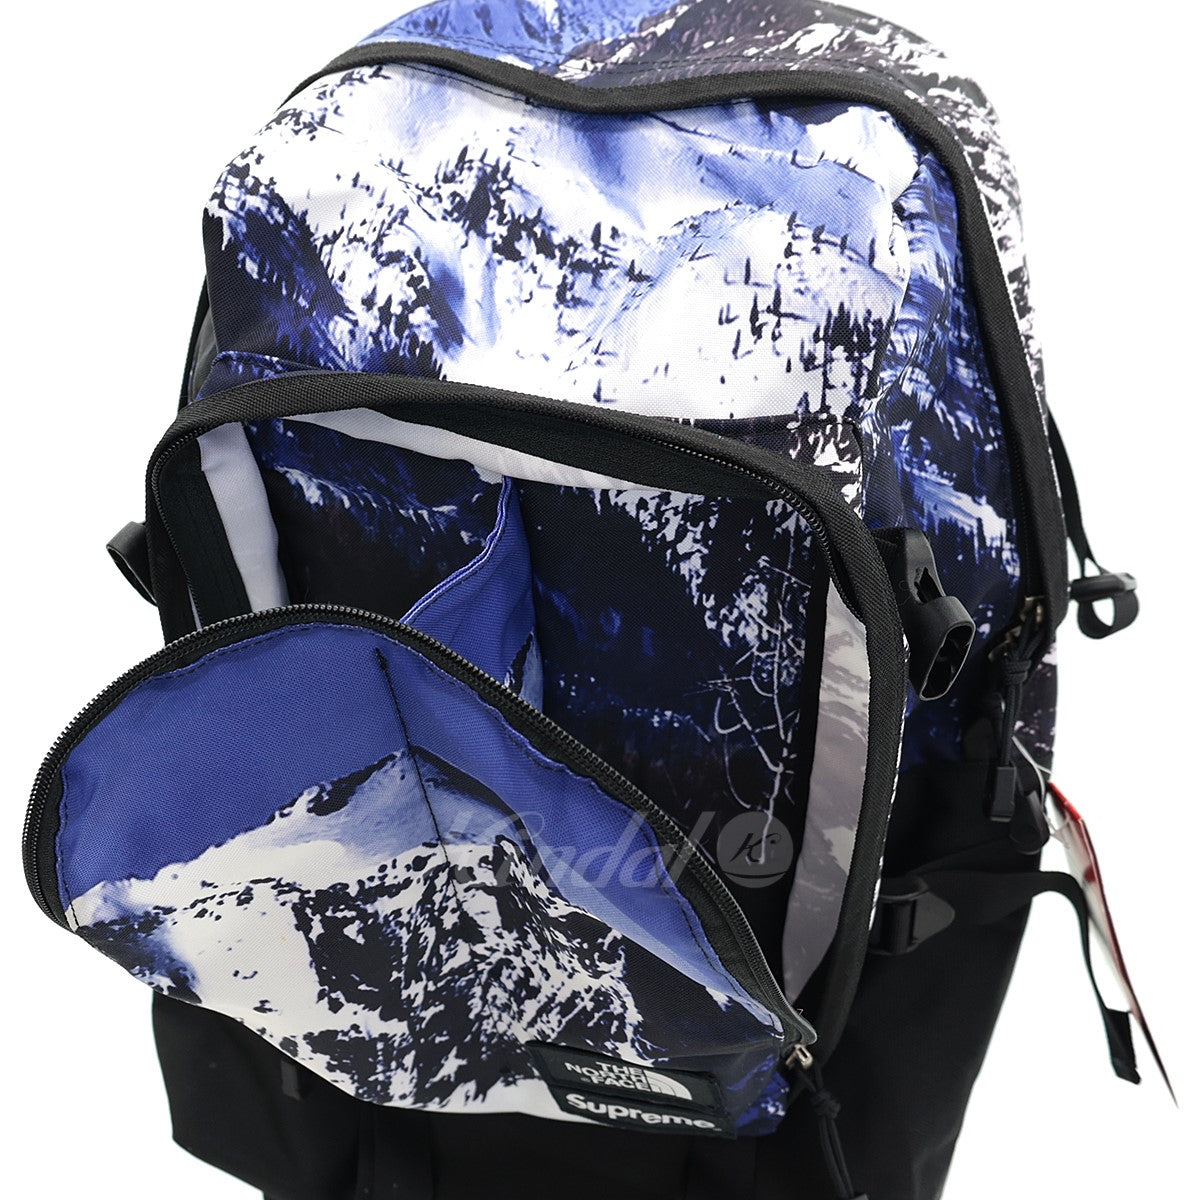 Supreme×THE NORTH FACE MOUNTAIN EXPEDITION BACKPACK バックパック NF0A3G74  NF0A3G74 ブルー／ブラック サイズ 13｜【公式】カインドオルオンライン ブランド古着・中古通販【kindal】